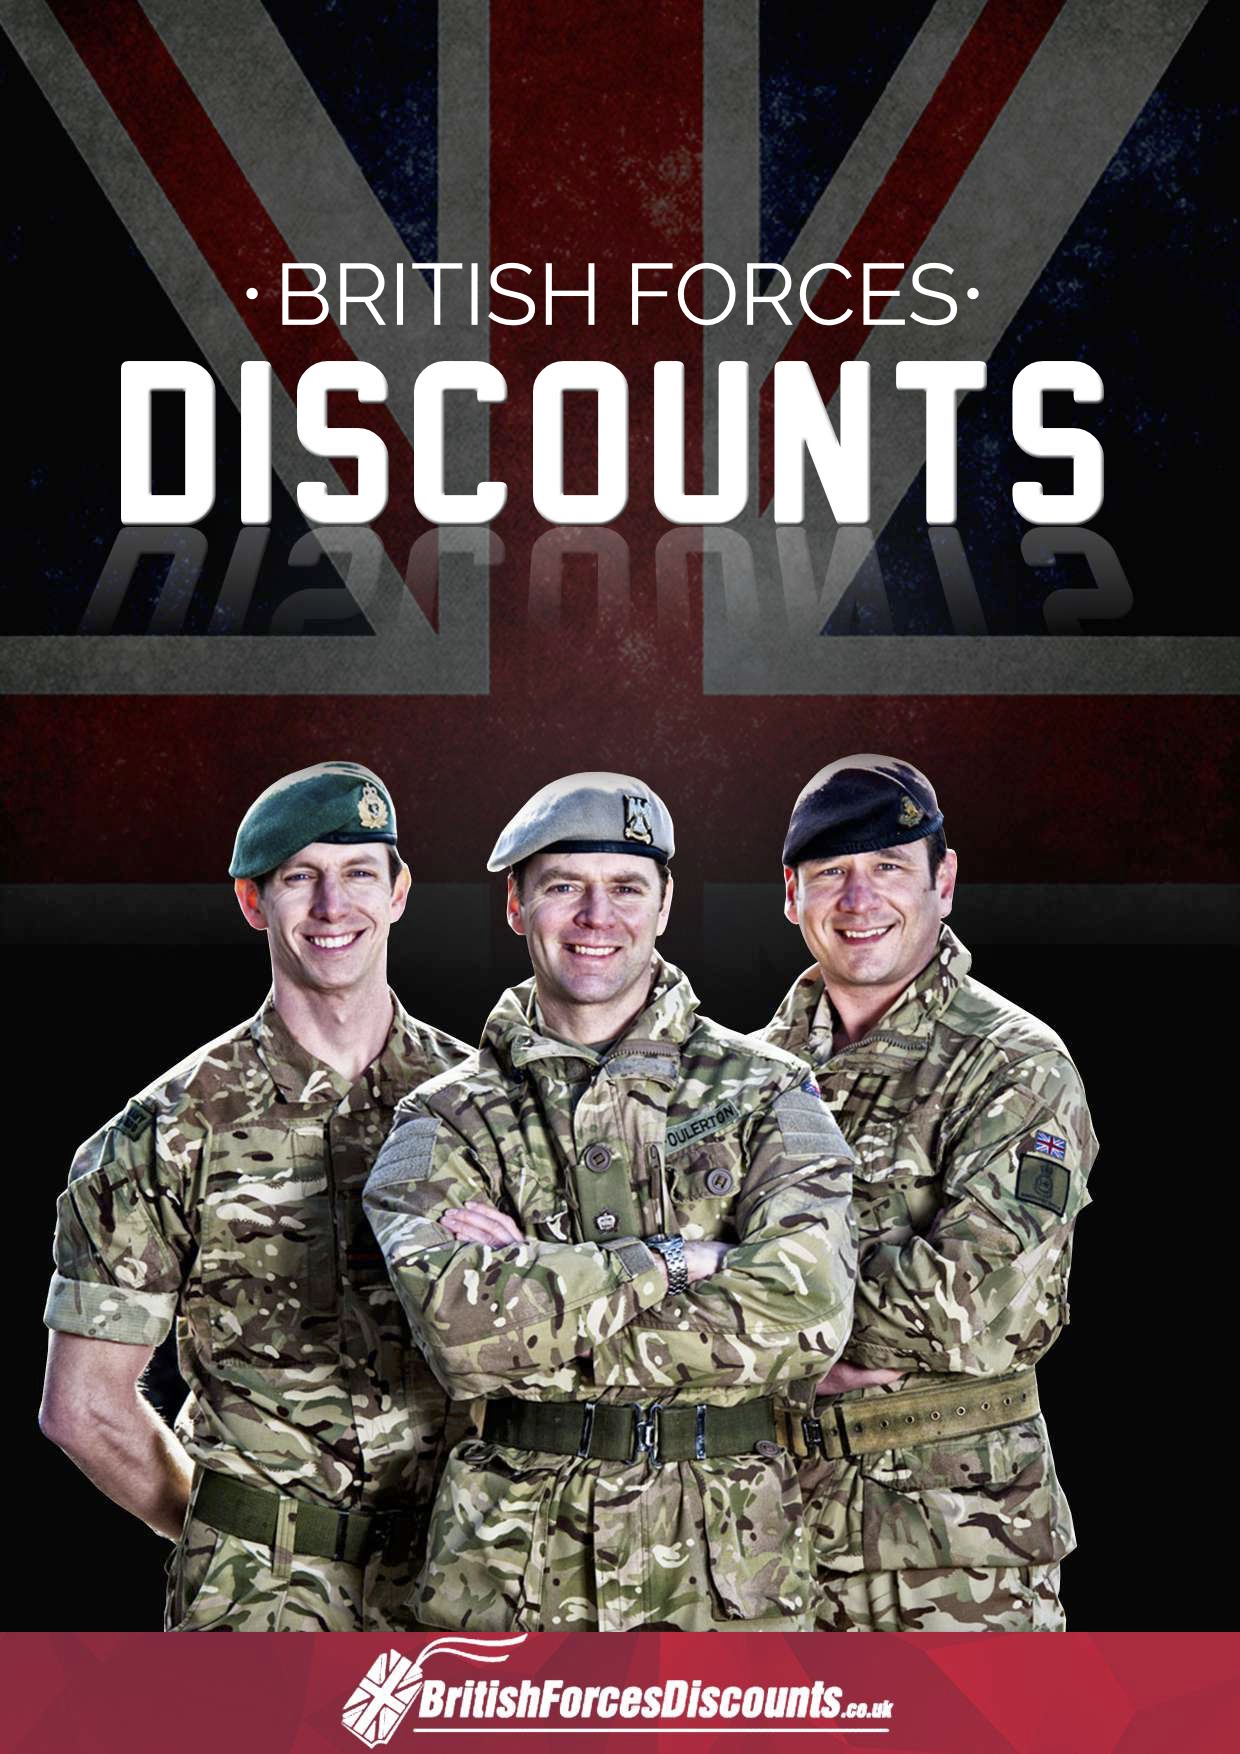 Discounts for British armed forces from Complete Furniture Services in Bristol